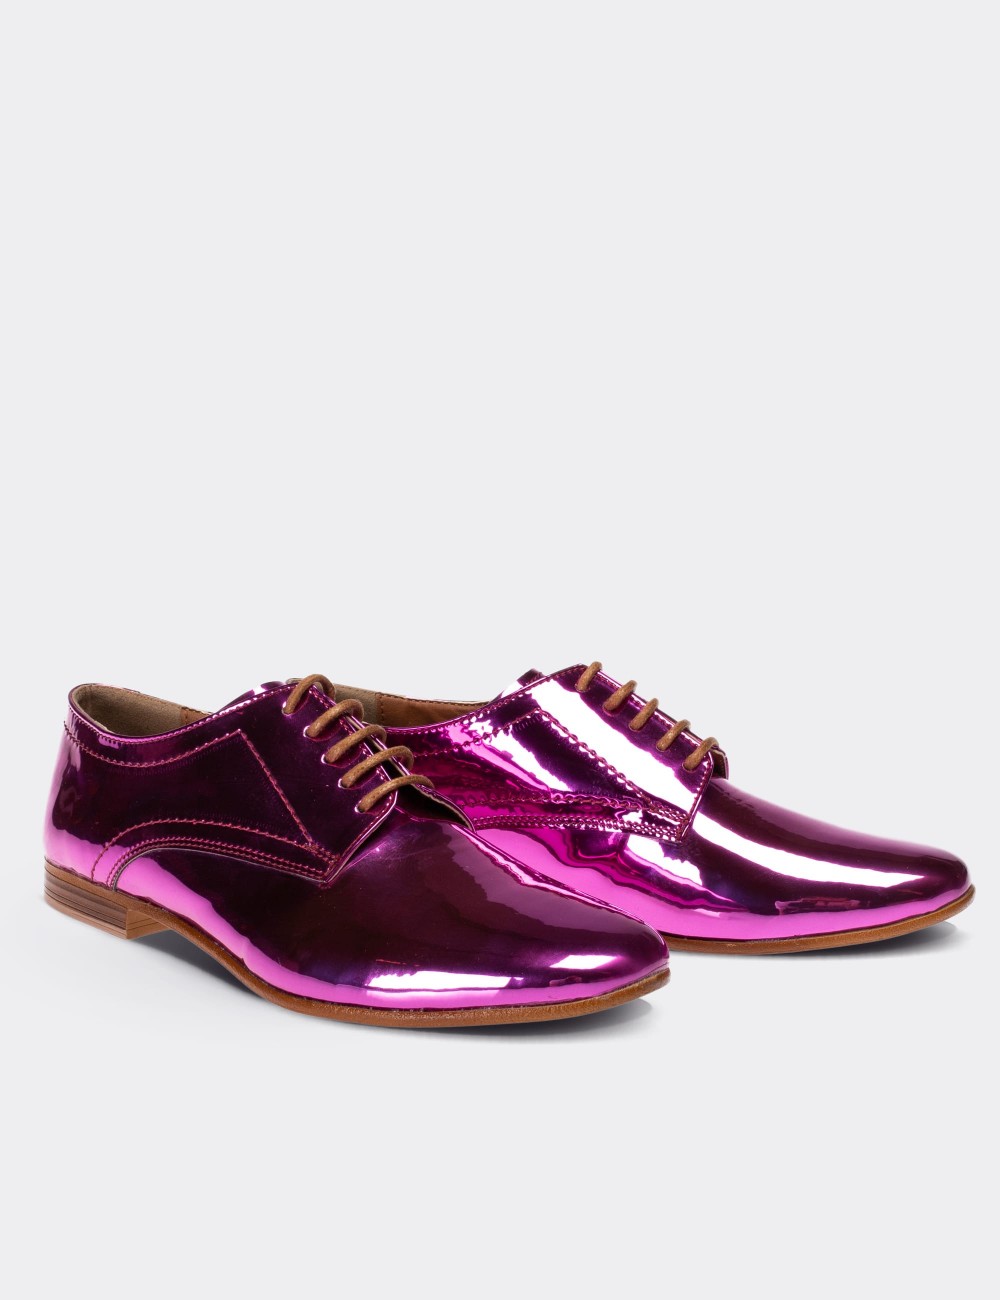 Pink Patent Leather Lace-up Shoes - 01430ZFSYC01